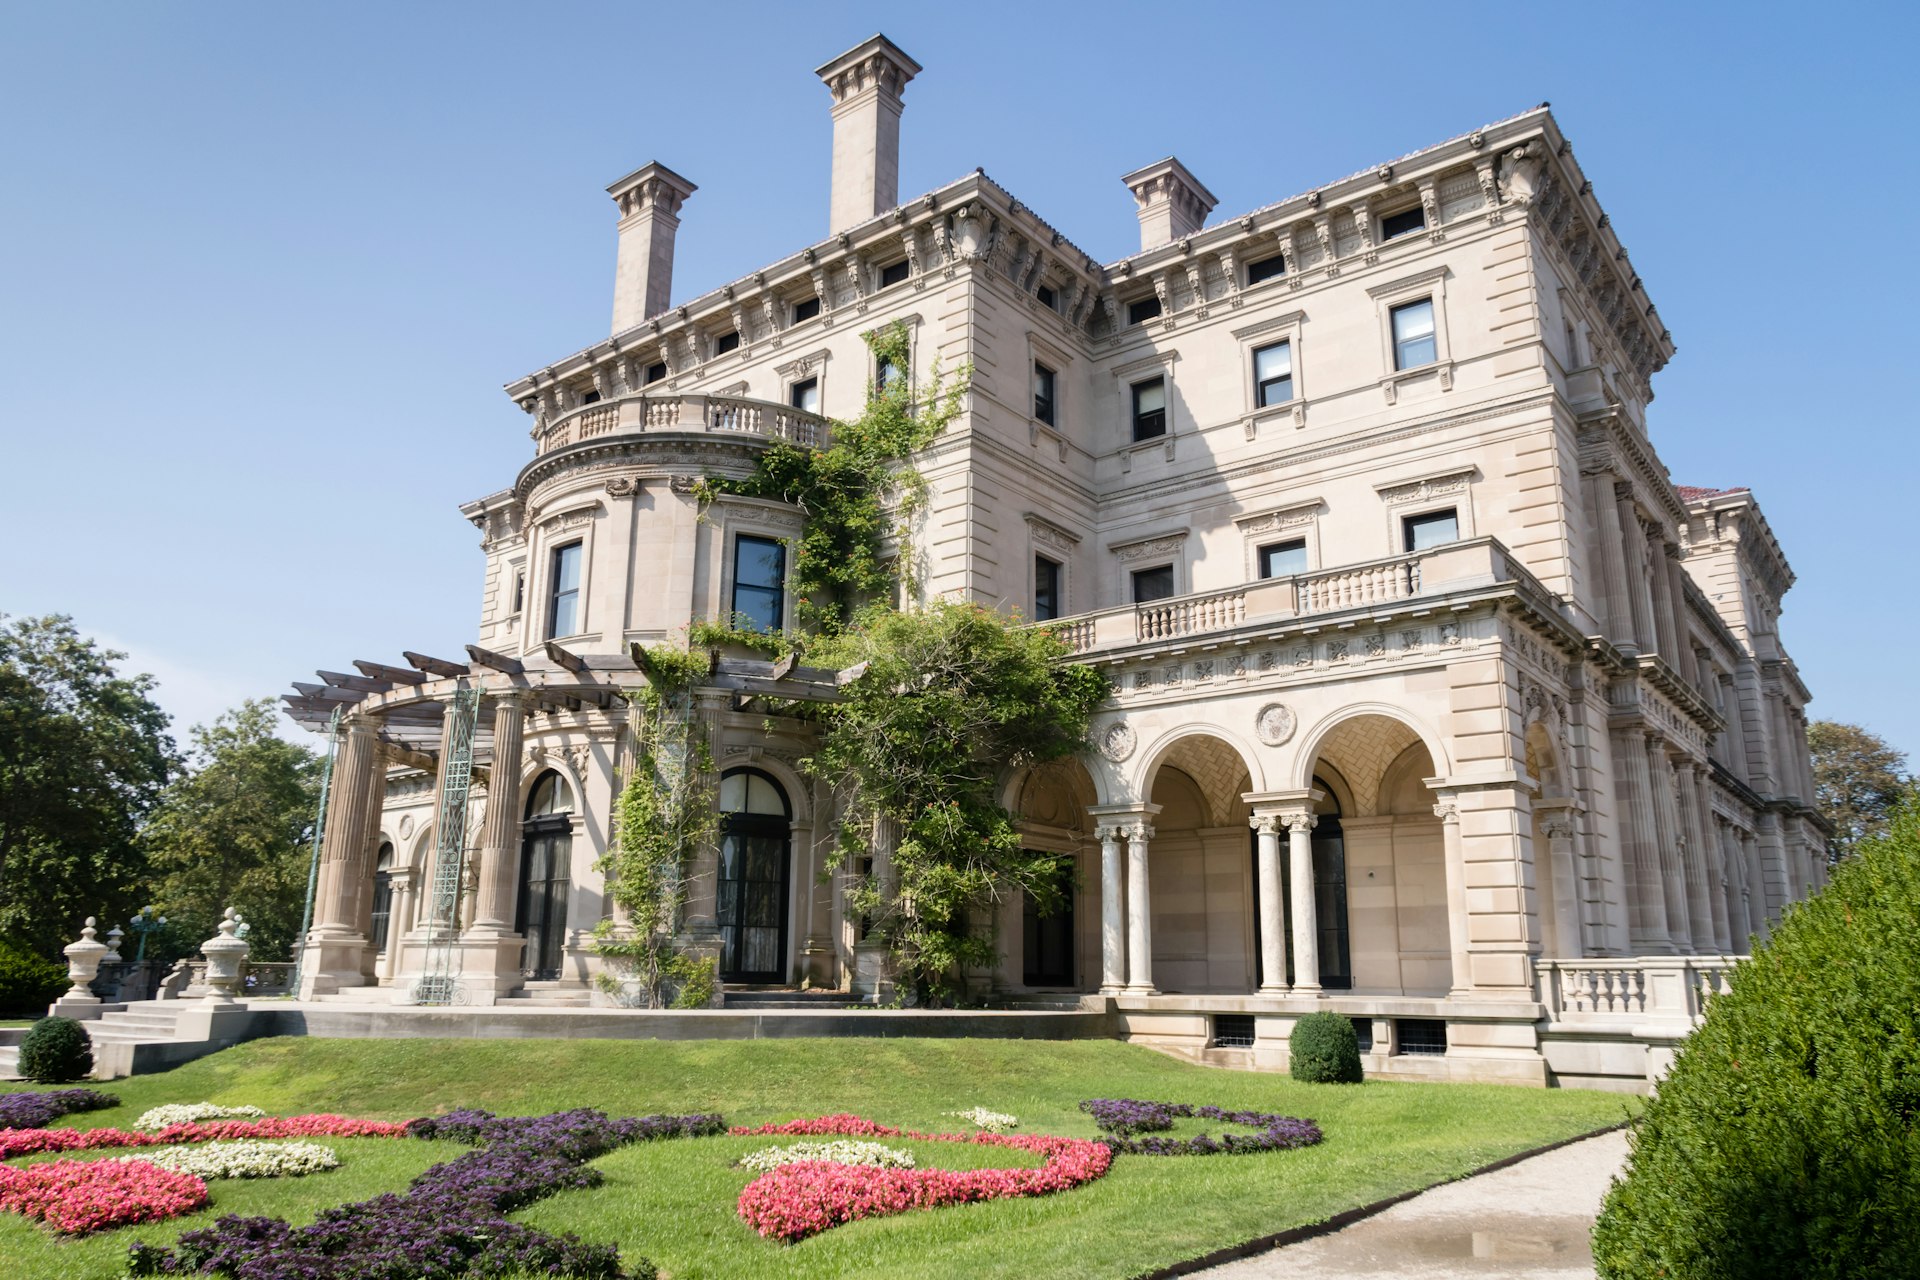 Exterior of the Breakers mansion in Newport, Rhode Island